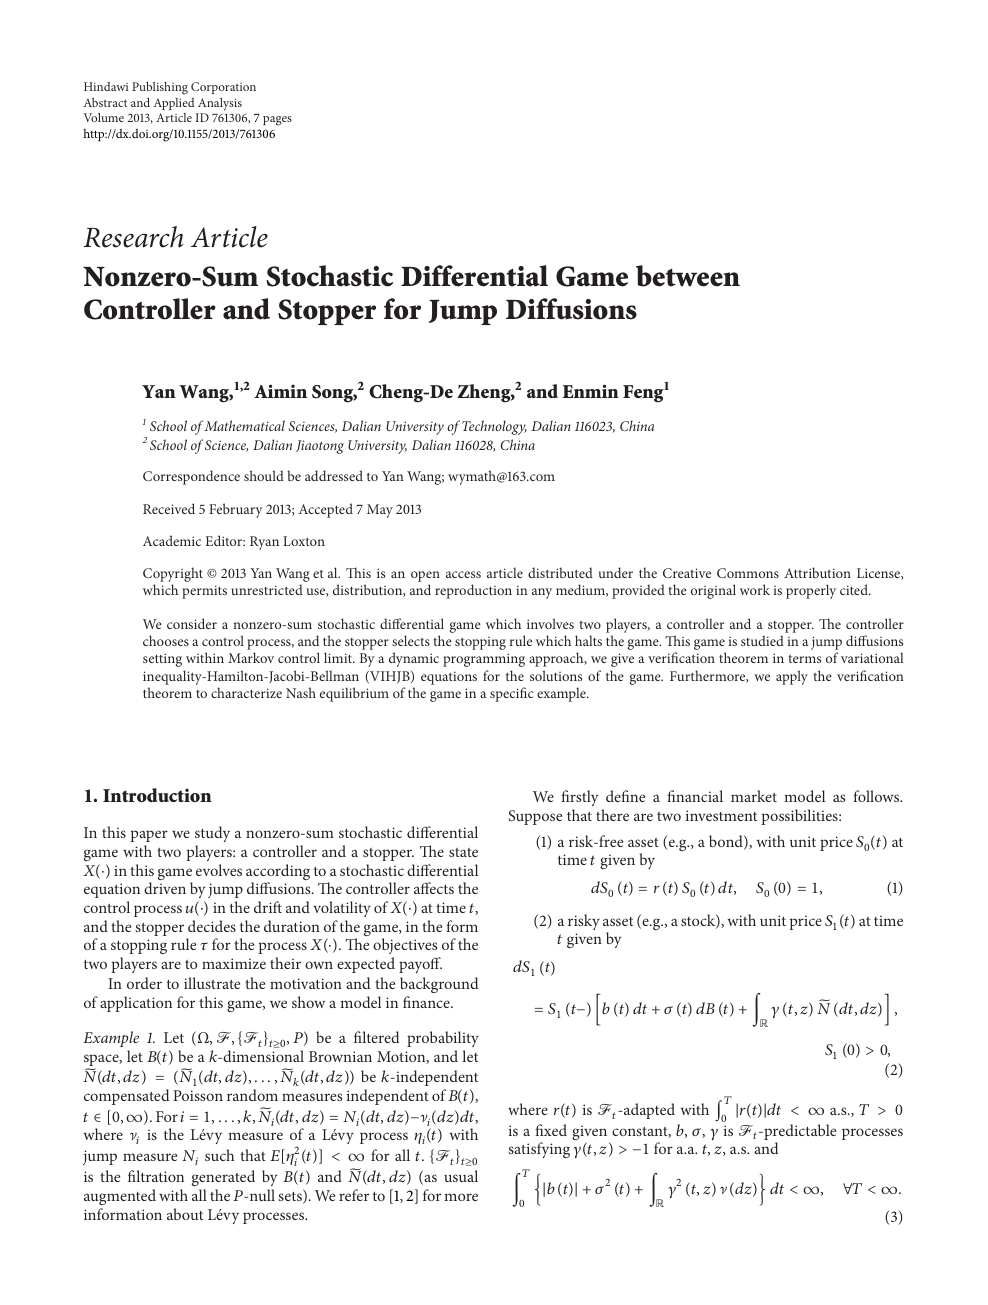 Nonzero Sum Stochastic Differential Game Between Controller And Stopper For Jump Diffusions Topic Of Research Paper In Mathematics Download Scholarly Article Pdf And Read For Free On Cyberleninka Open Science Hub